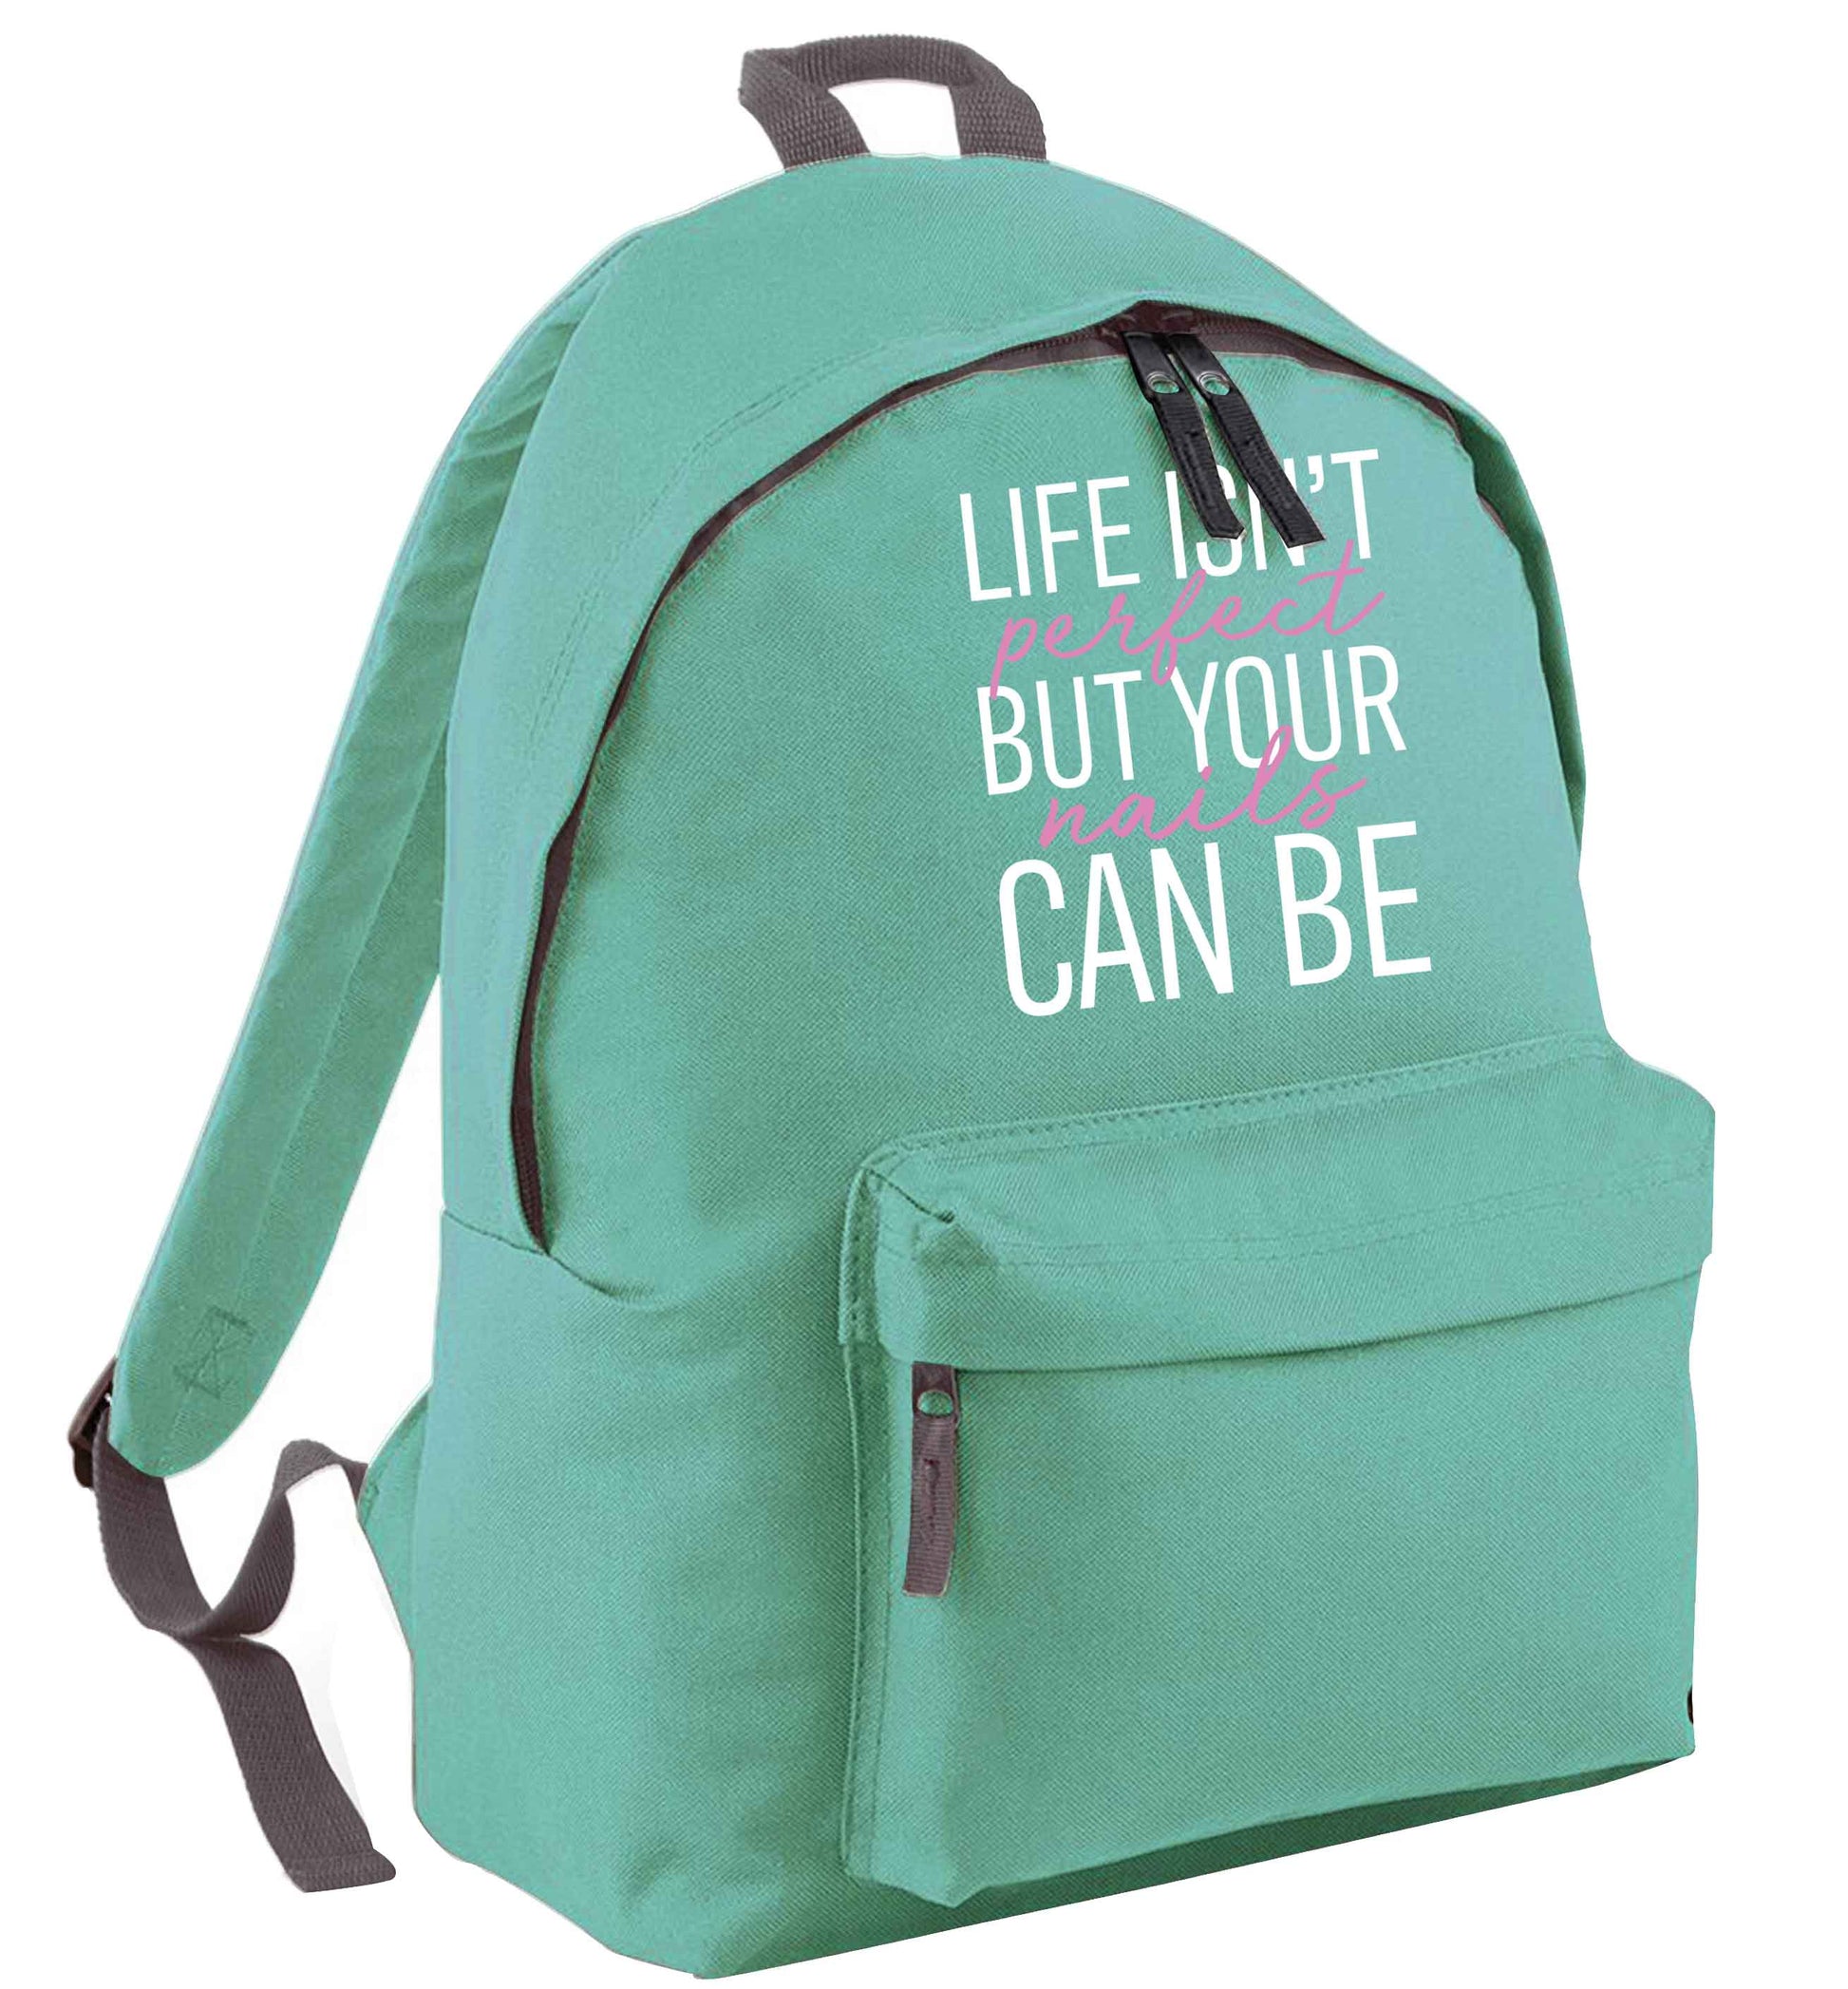 Life isn't perfect but your nails can be mint adults backpack